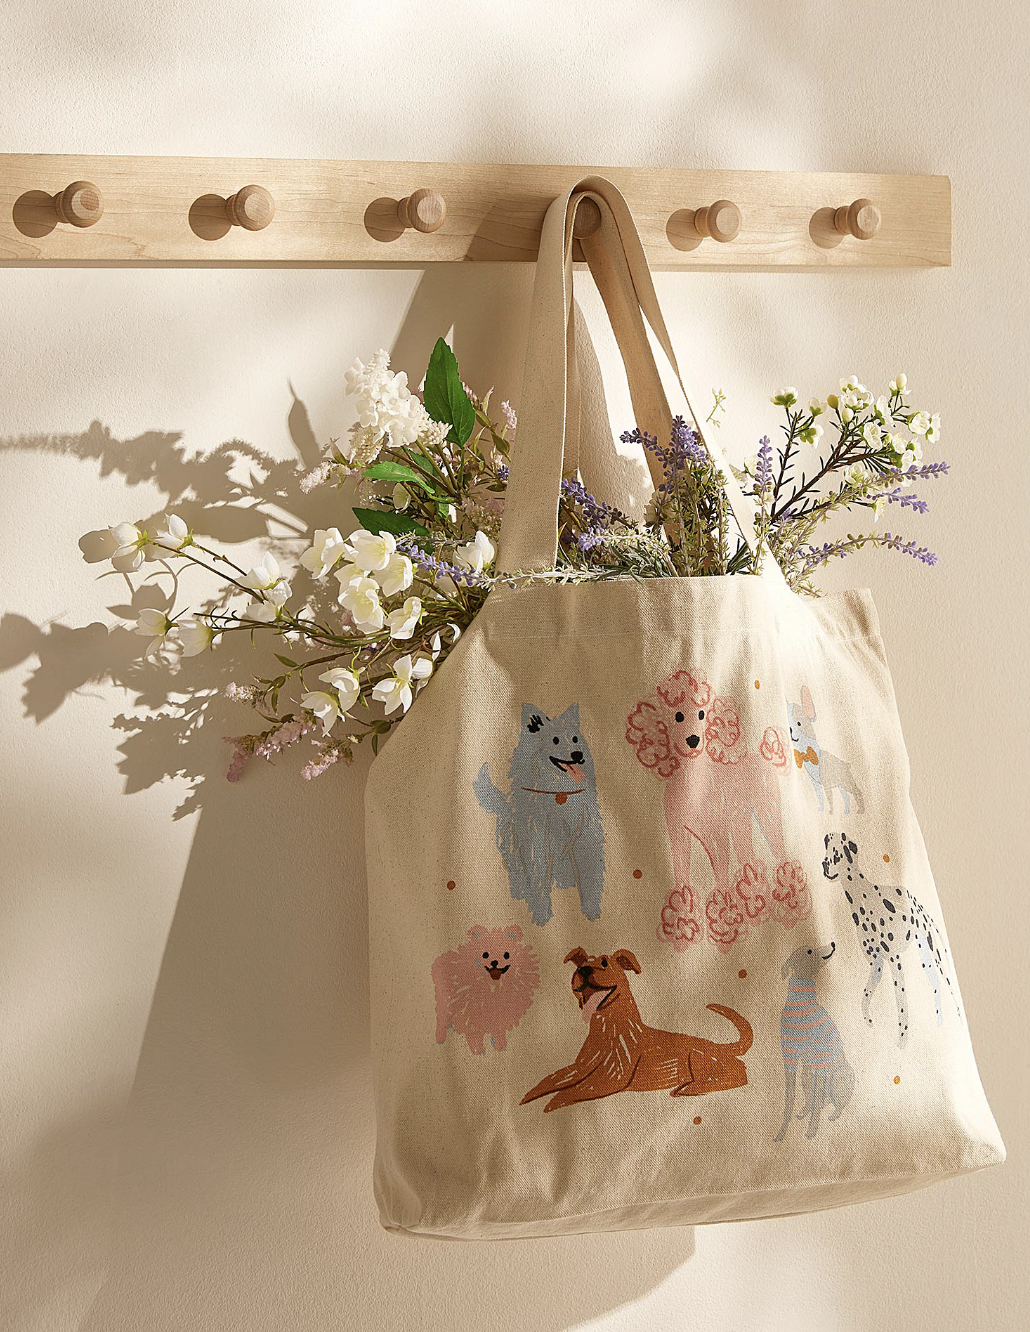 the tote hanging on the wall filled with flowers